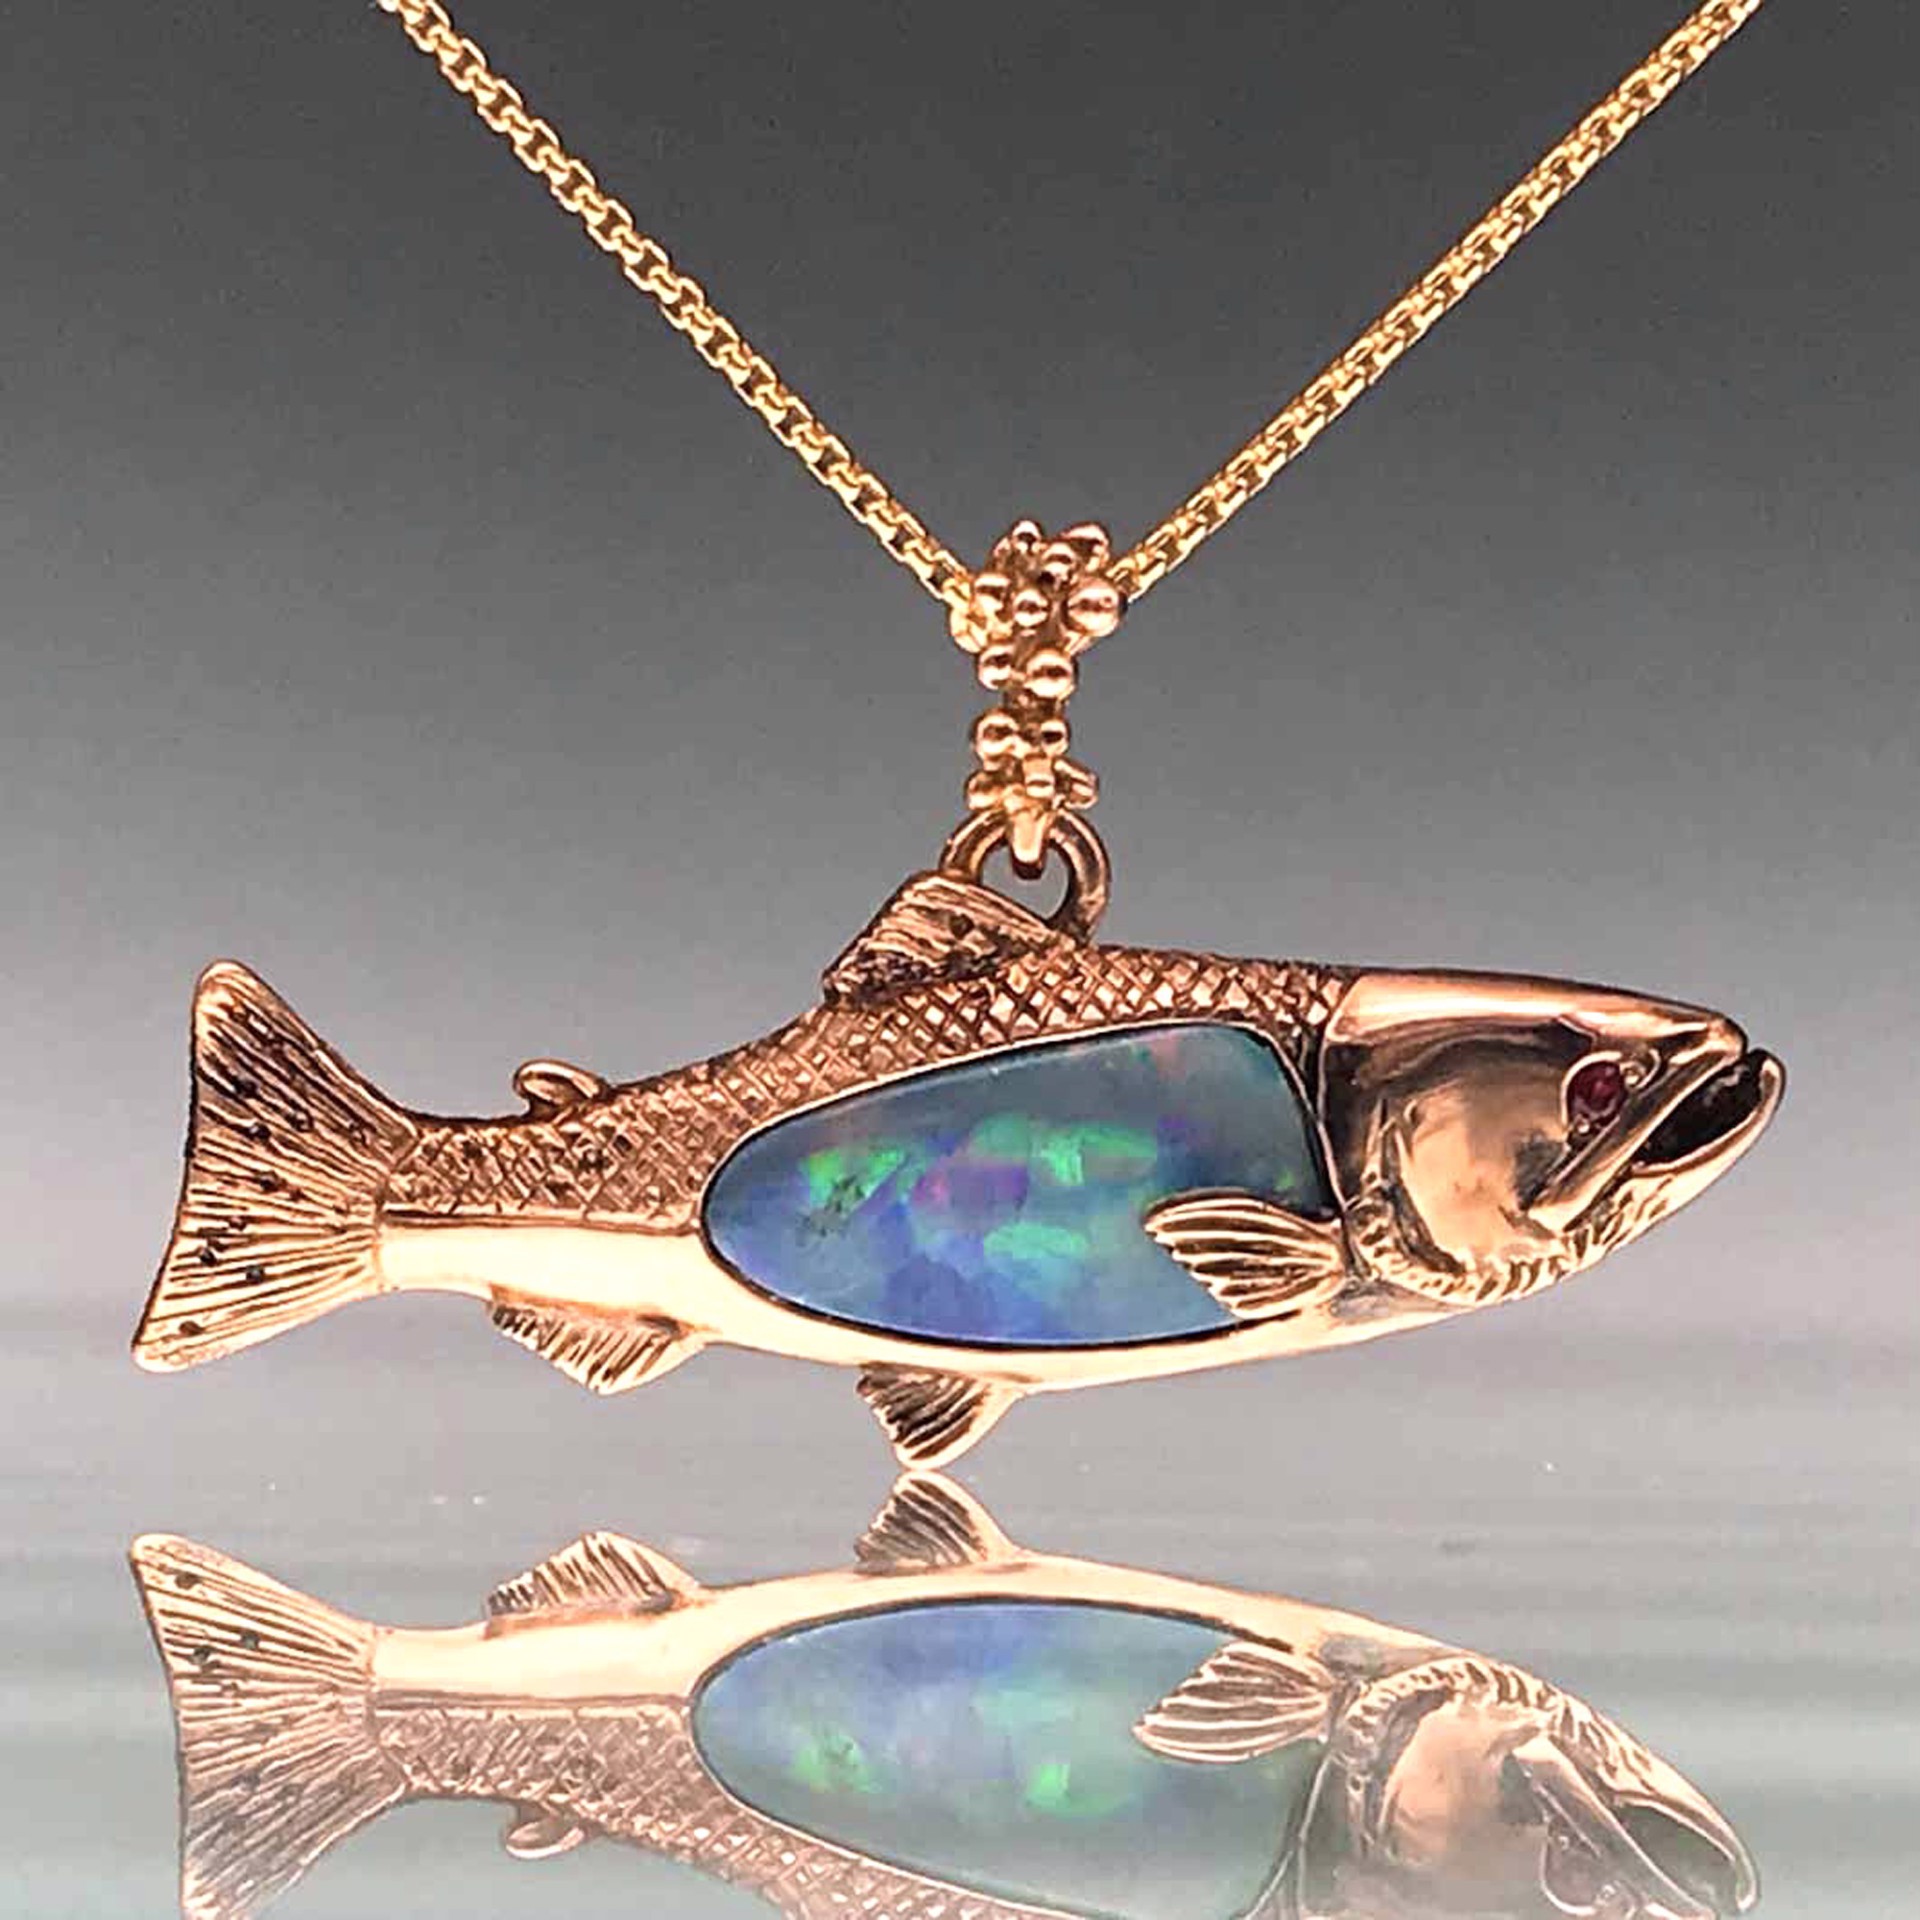 Salmon Pendant with Opal Inlay, Ruby Eye by Thomas Tietze